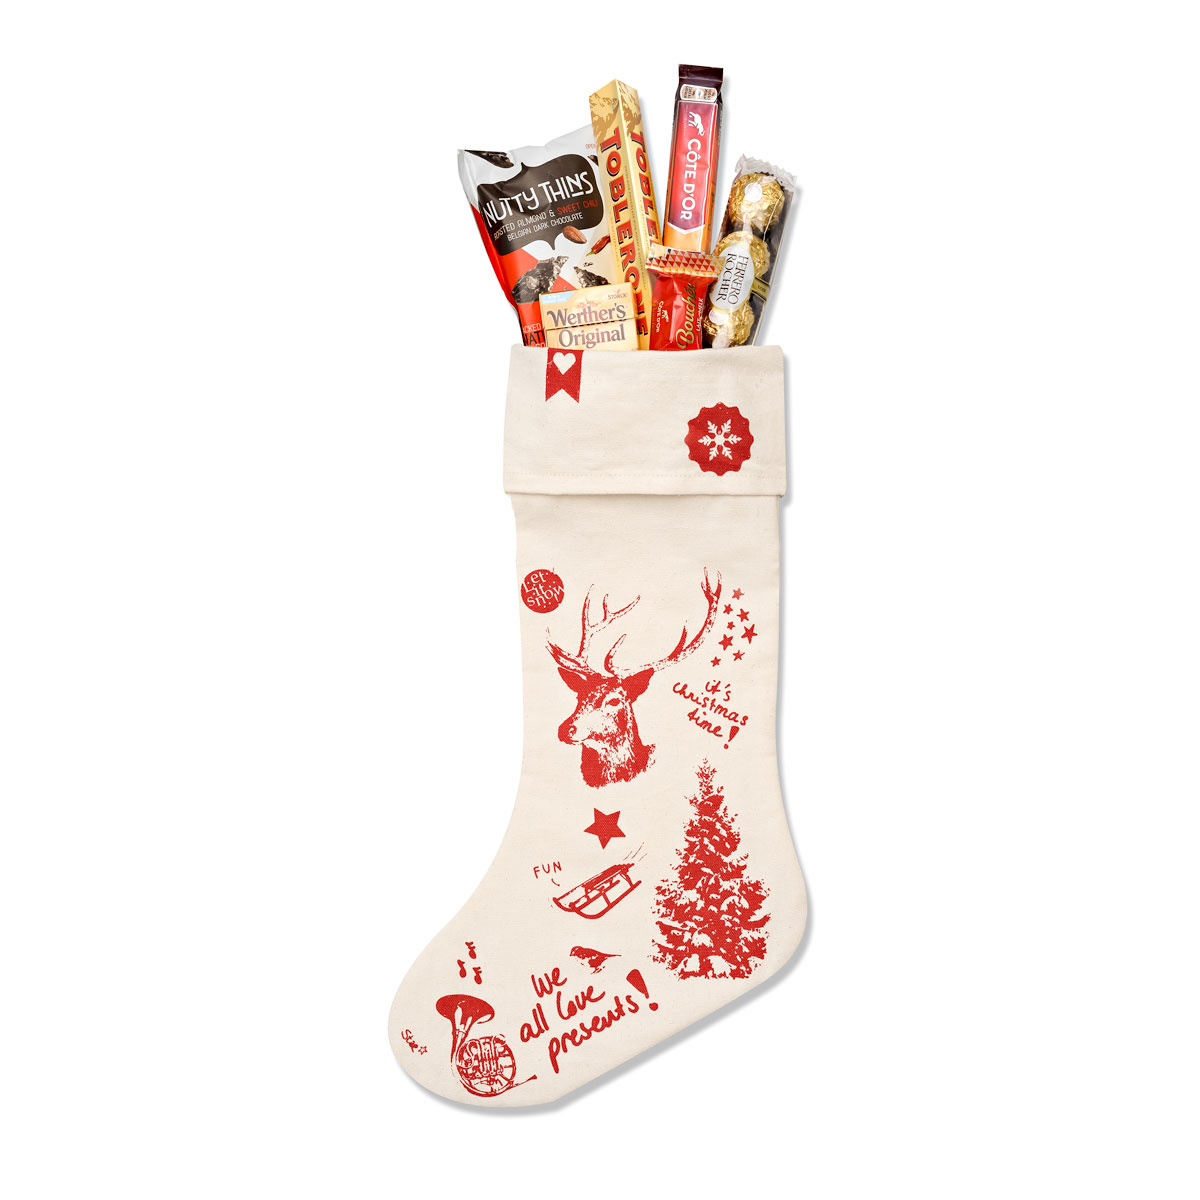 Candy Stuffed Christmas Stockings / Rbs Classic Christmas Stocking Pre Filled With Toys Coloring Book Crayons Card Game Yoyo Lip Smacker Candy Jewelry Jax Girls 5 Up Girls Walmart Com Walmart Com